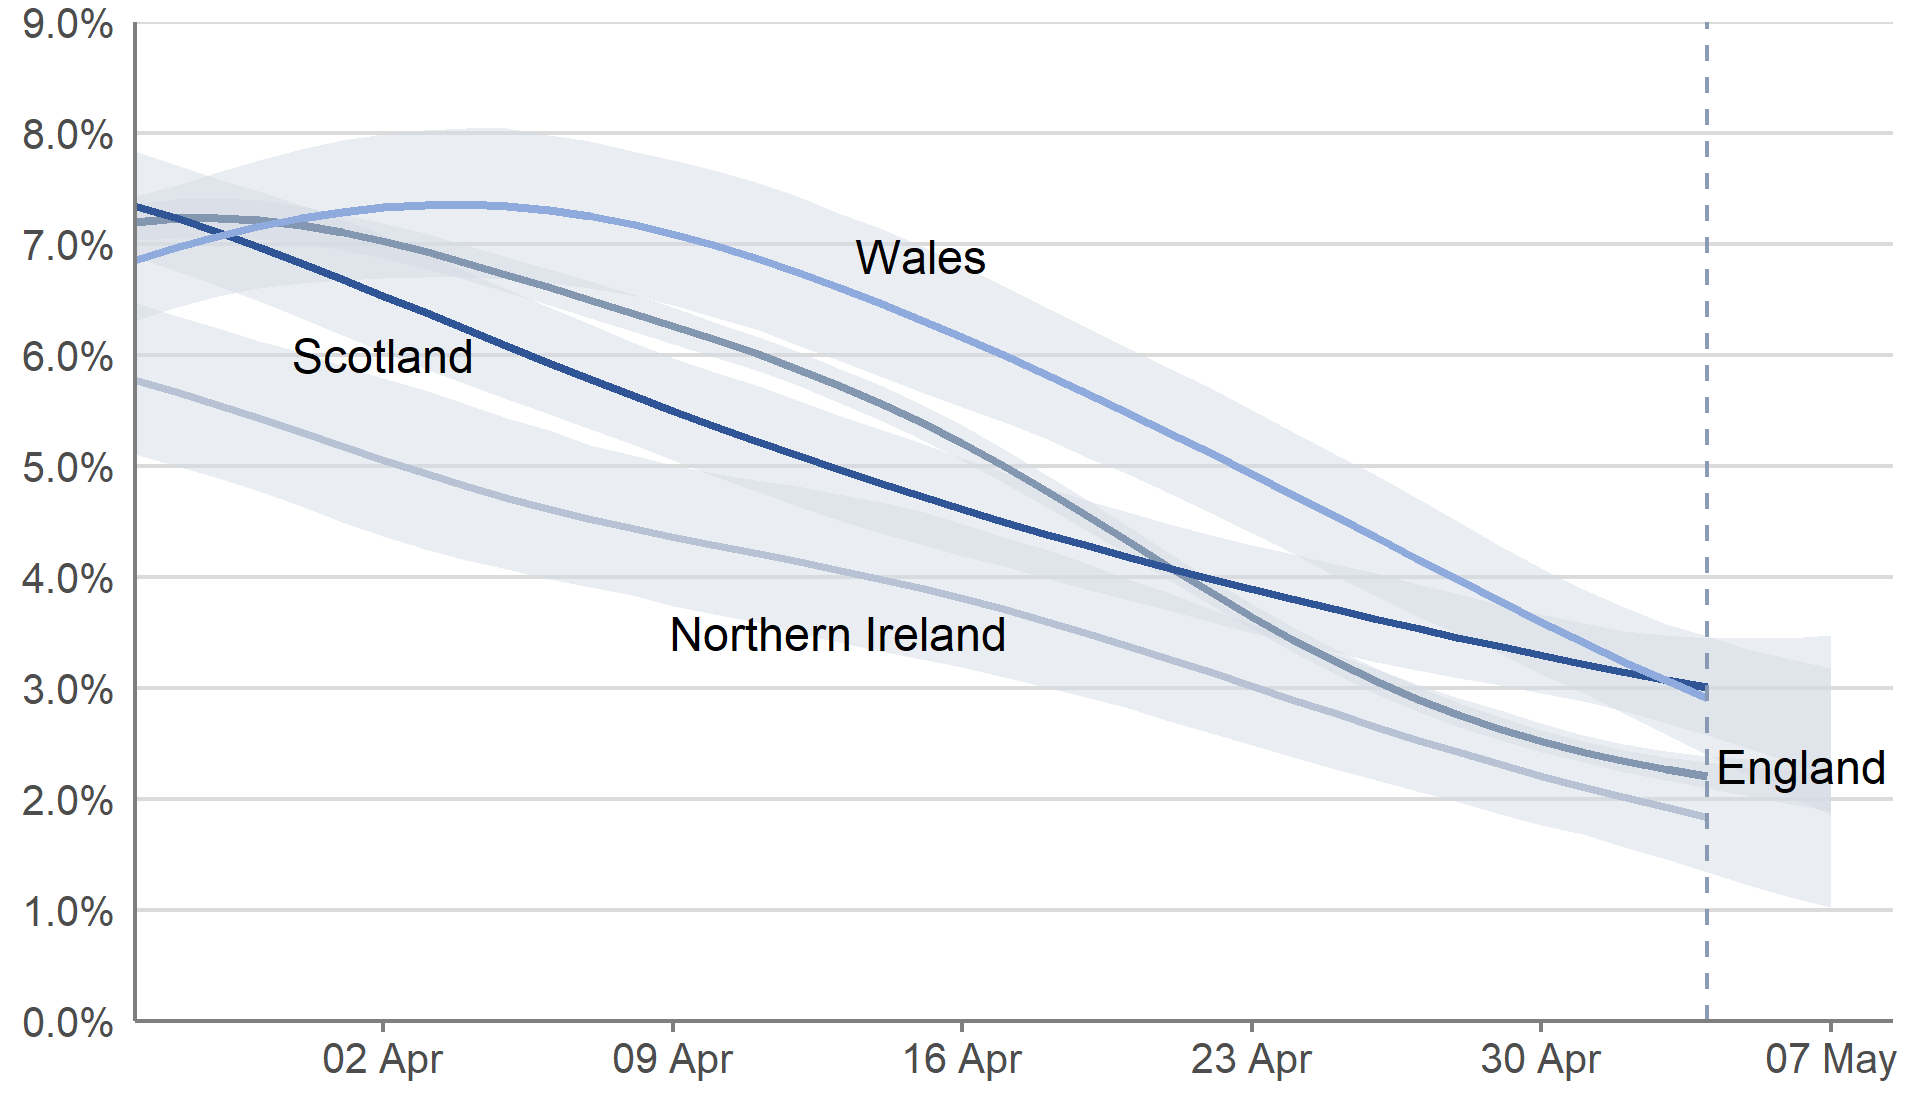 In the most recent week from 1 to 7 May 2022, the percentage of people testing positive for COVID-19 continued to decrease in England, Wales, Northern Ireland and Scotland.